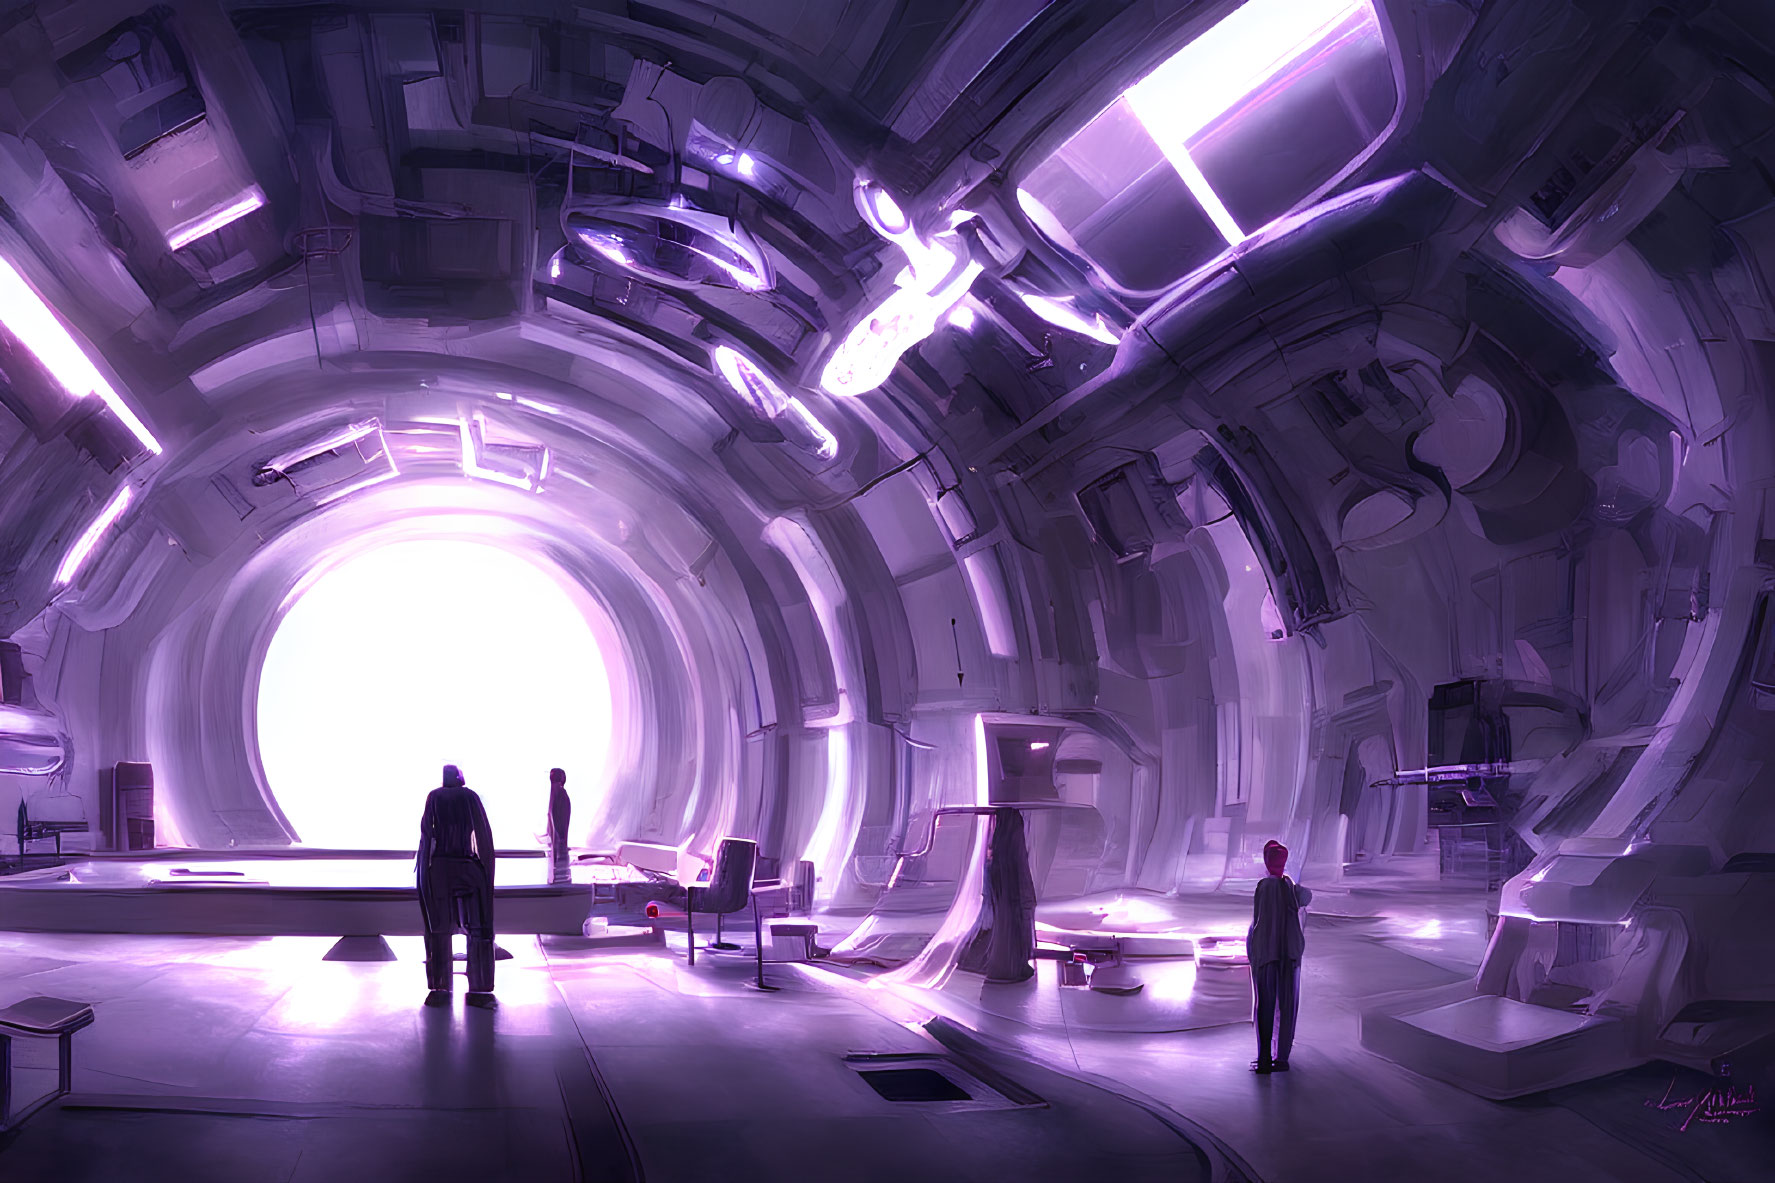 Futuristic room with large portal, purple and white light, silhouettes of two individuals,